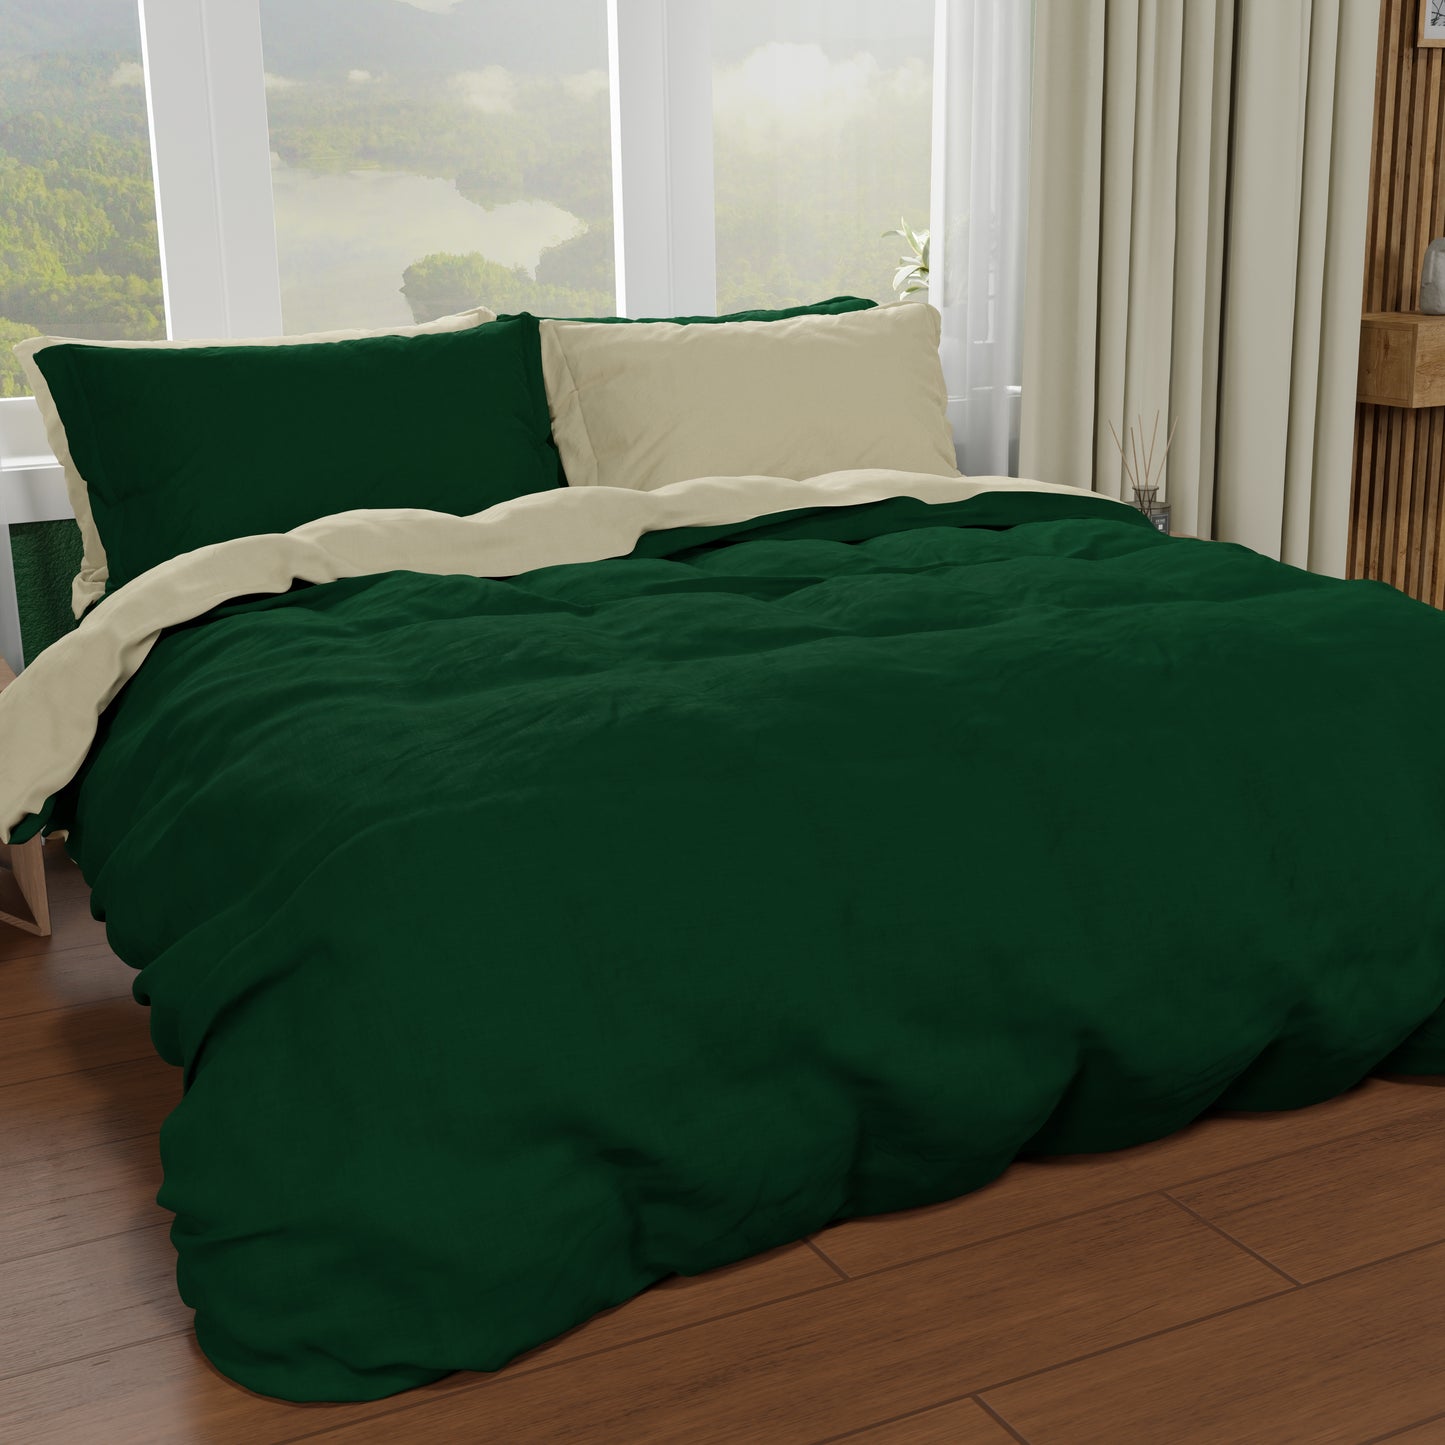 Double Duvet Cover, Duvet Cover and Pillowcases, Taupe/Emerald Green